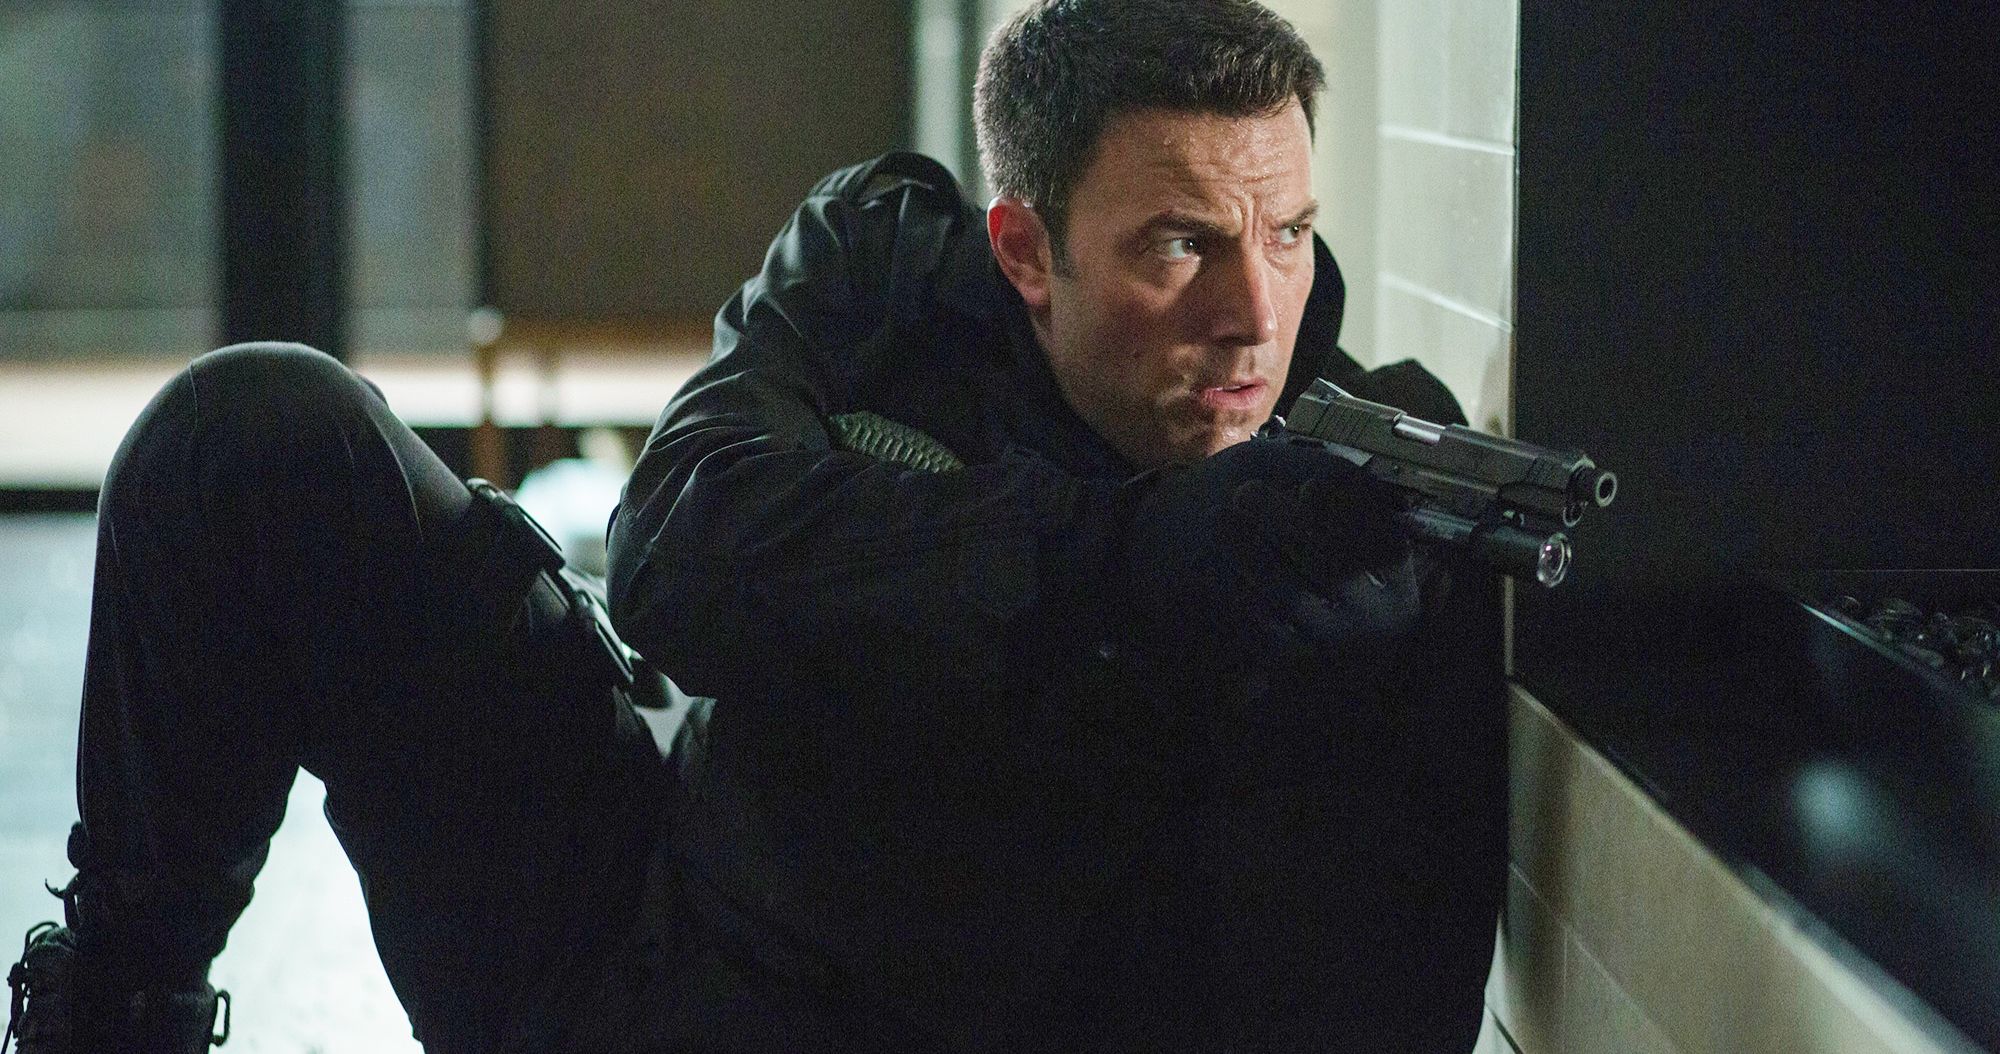 Ben Affleck Isn't So Sure About The Accountant 2, Maybe It'll Become a TV Show